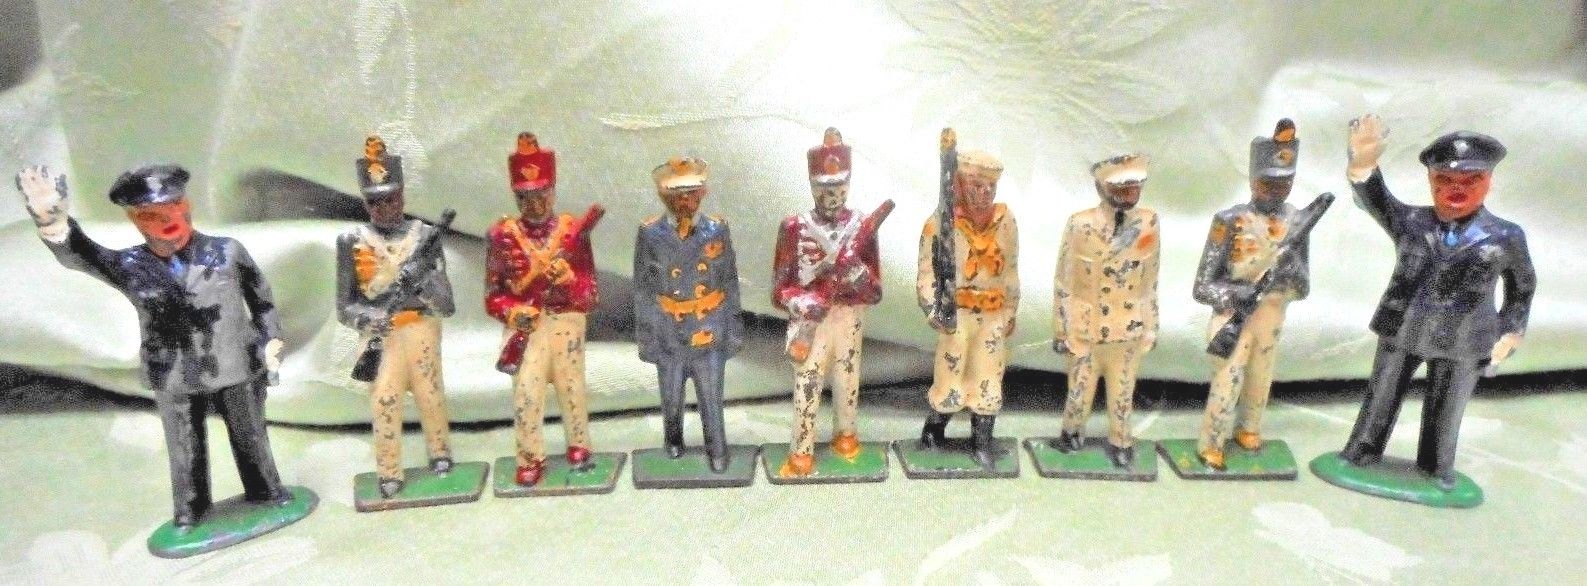 Antique Lead Toy Soldiers Policemen Military Lot of 9